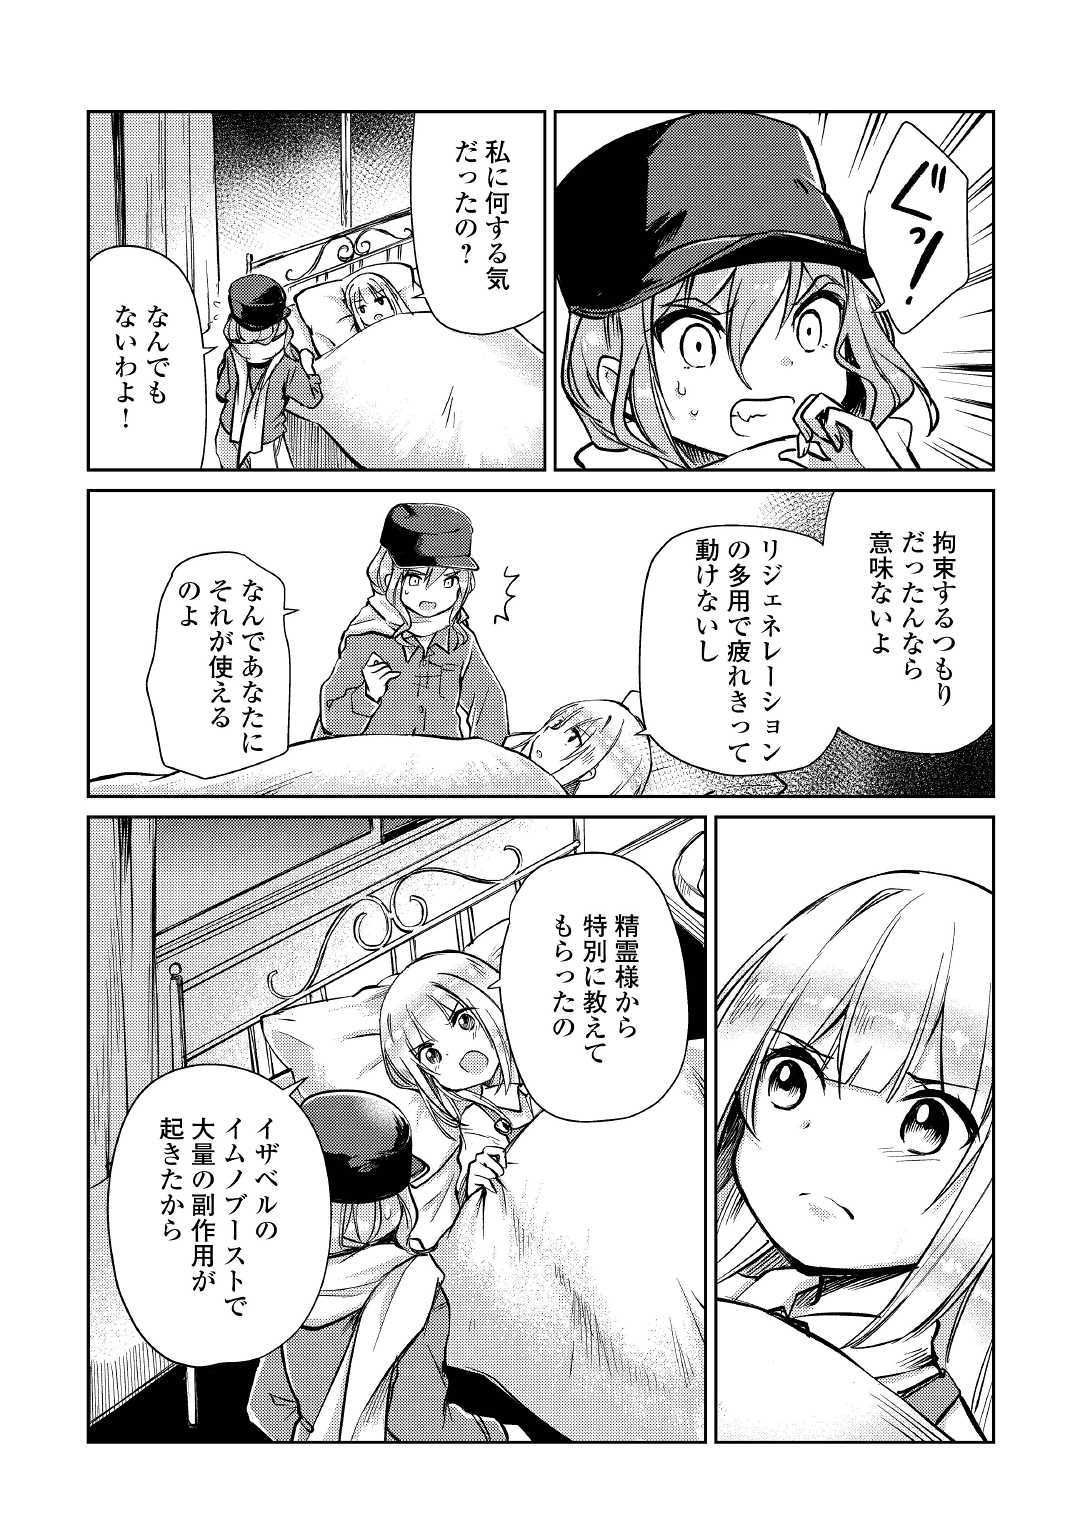 The Former Structural Researcher’s Story of Otherworldly Adventure 第11話 - Page 16